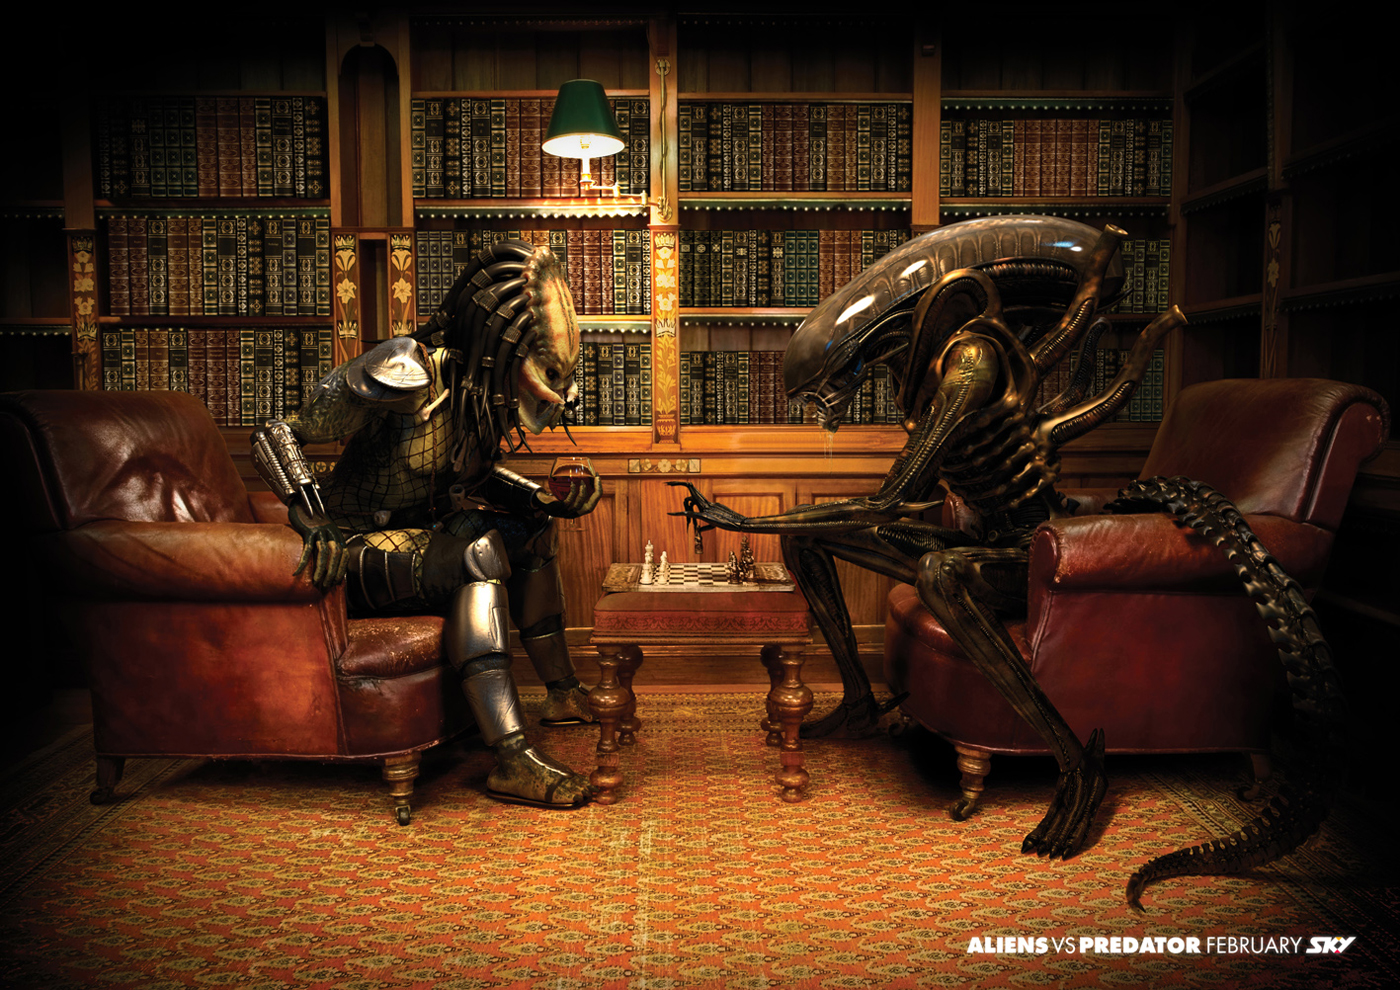 1400px x 990px - Way Cooler Than Anything In Either ALIEN VS. PREDATOR Film